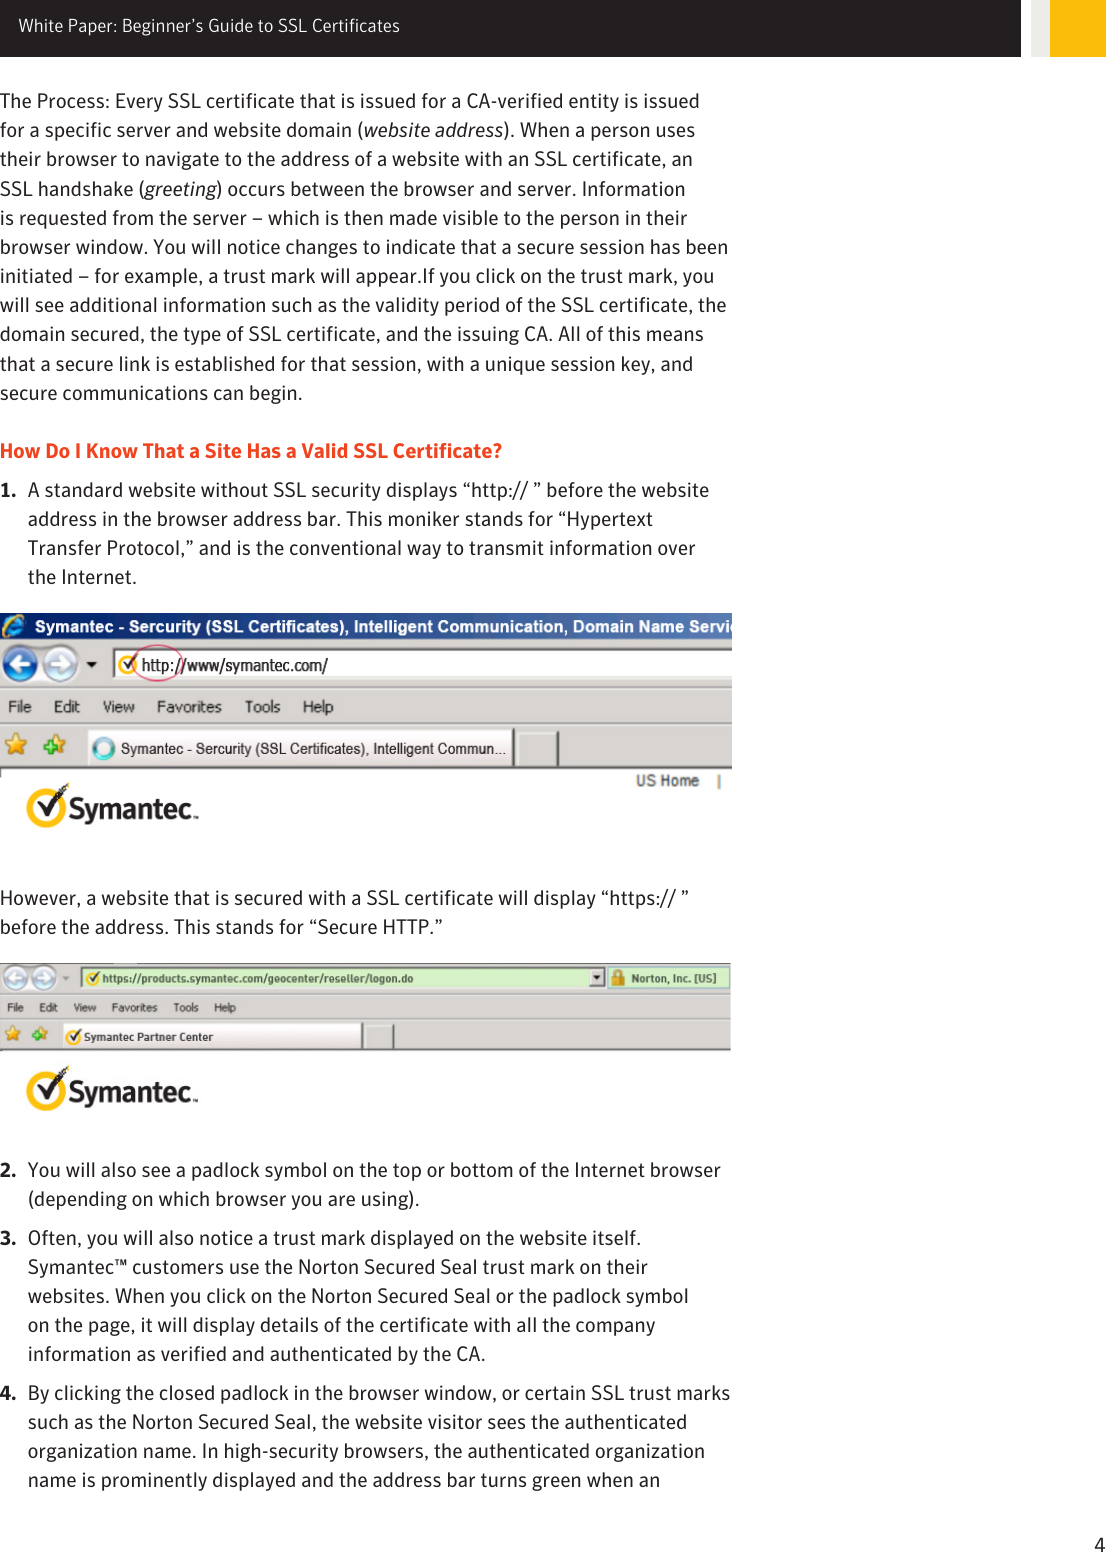 Page 4 of 8 - Beginners-guide-to-ssl-certificates